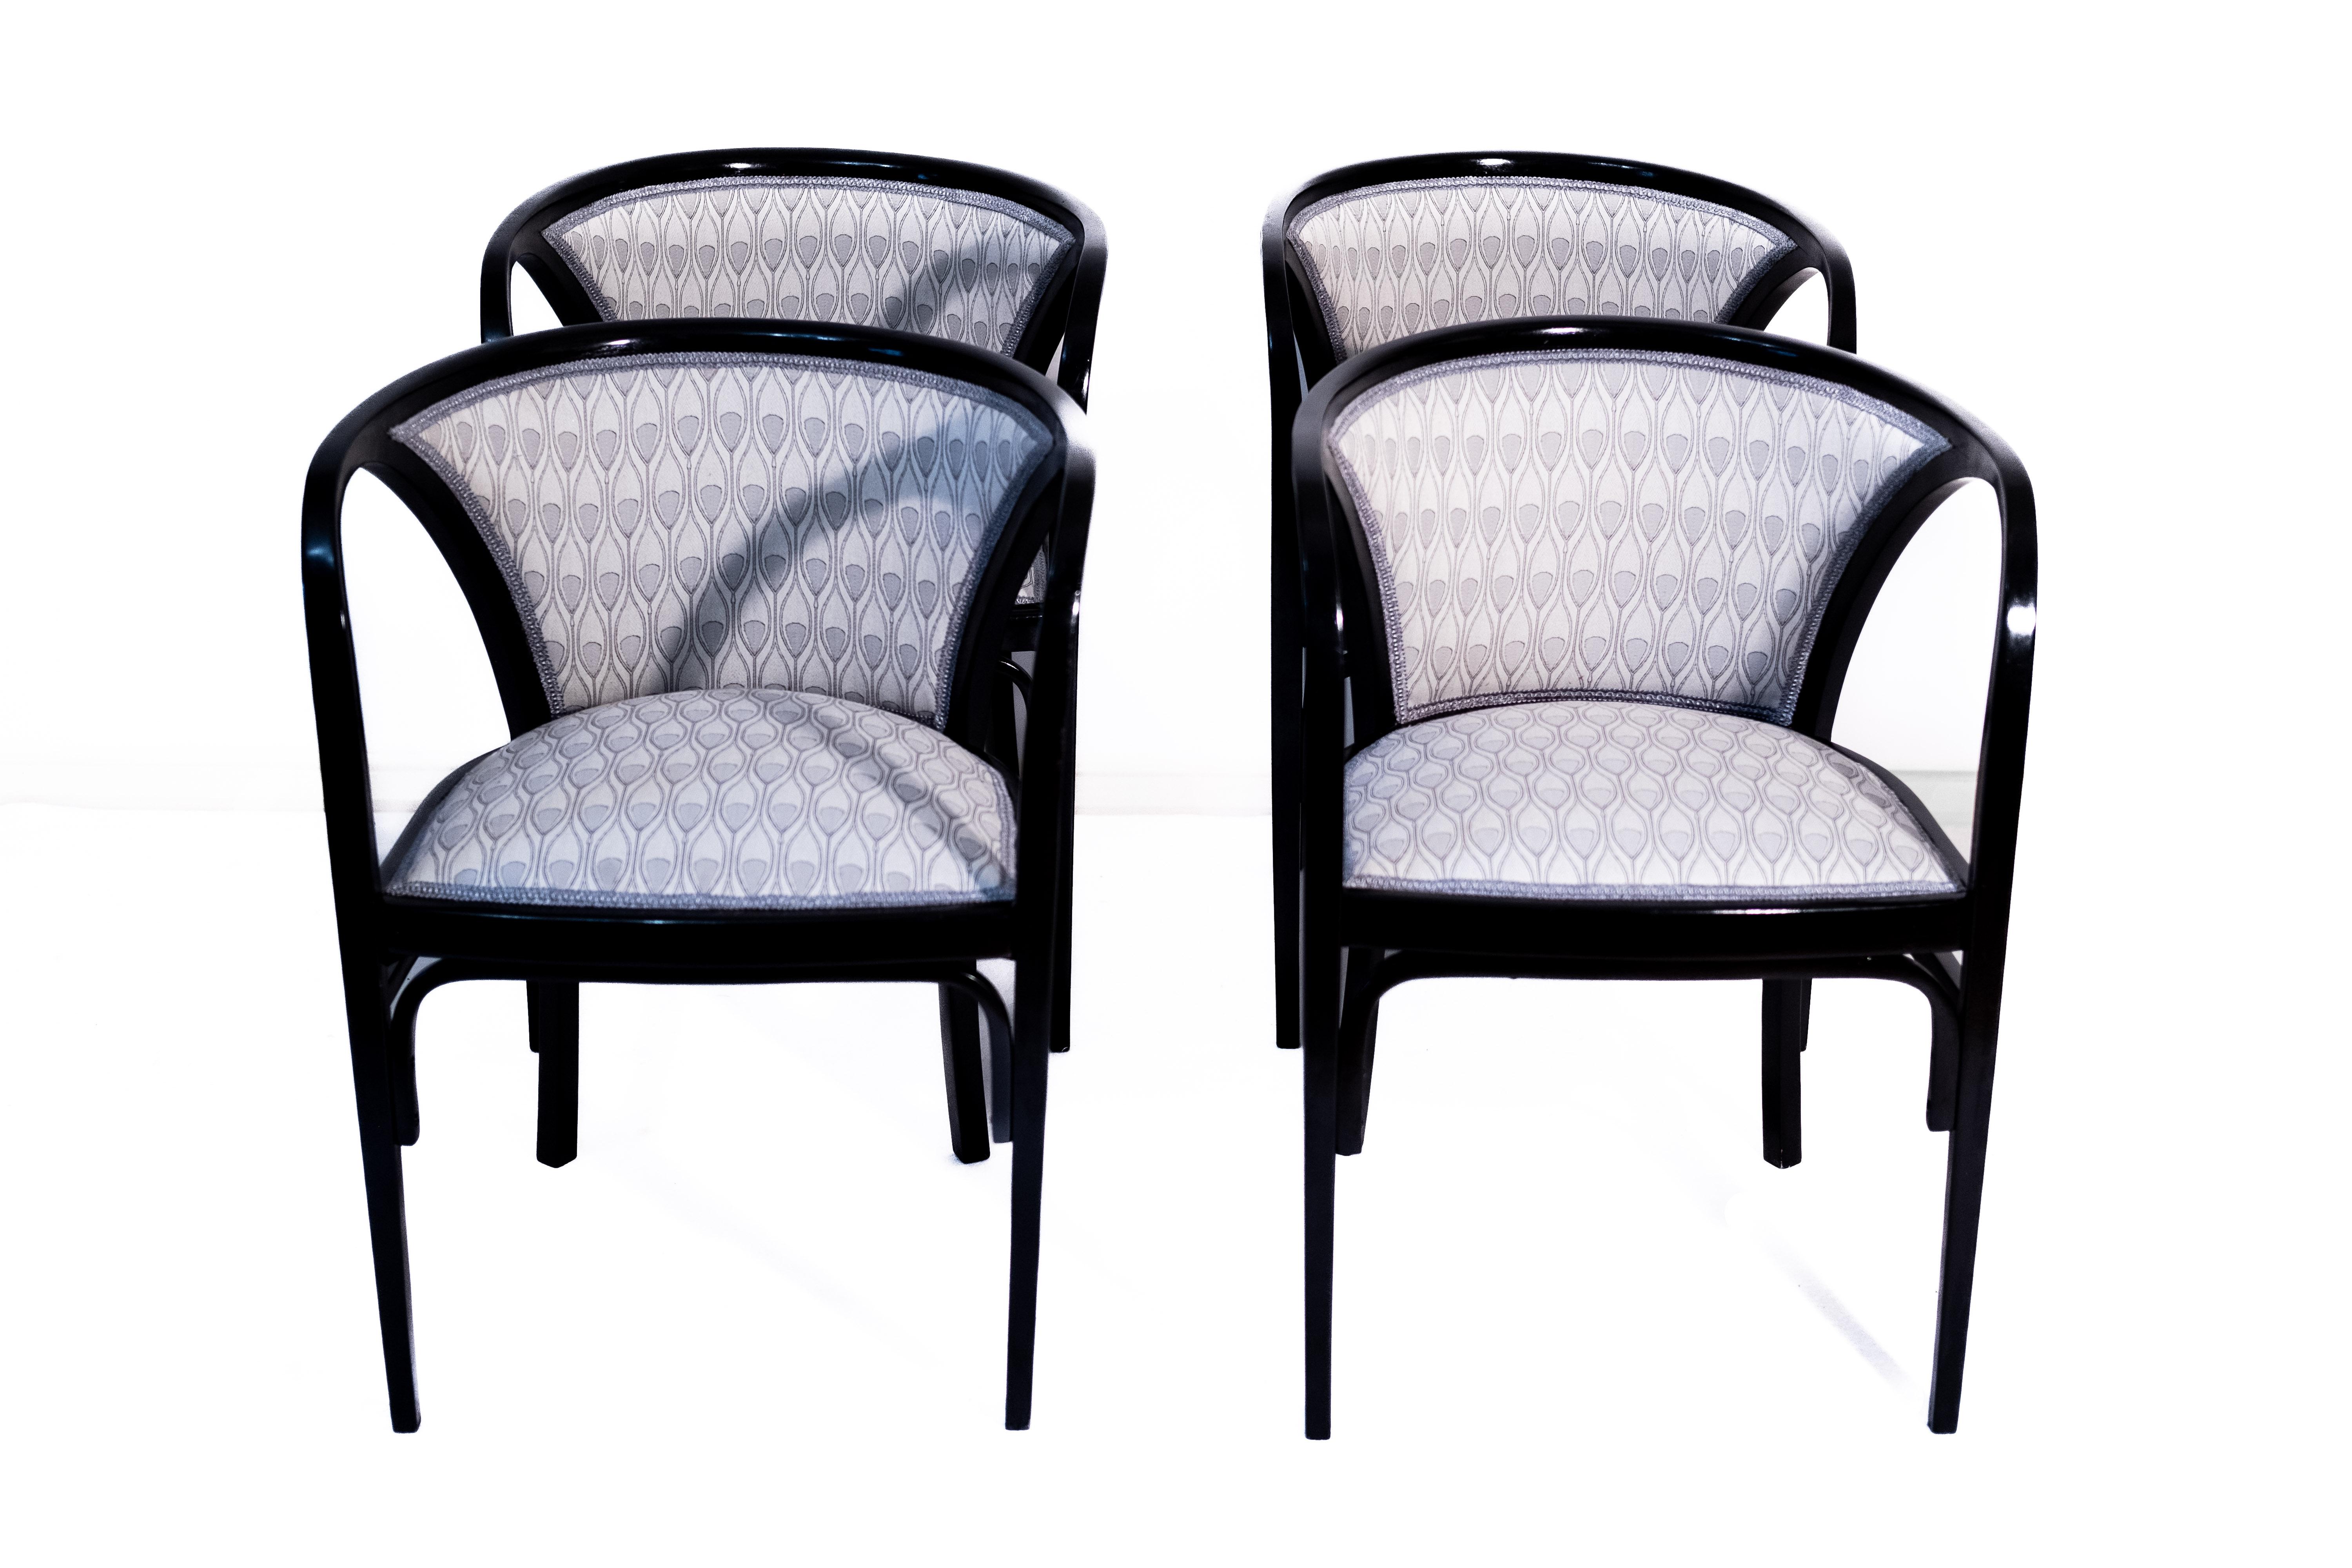 Austrian Secessionistic Armchair by Marcel Kammerer for Thonet Brothers (Vienna, 1910) For Sale